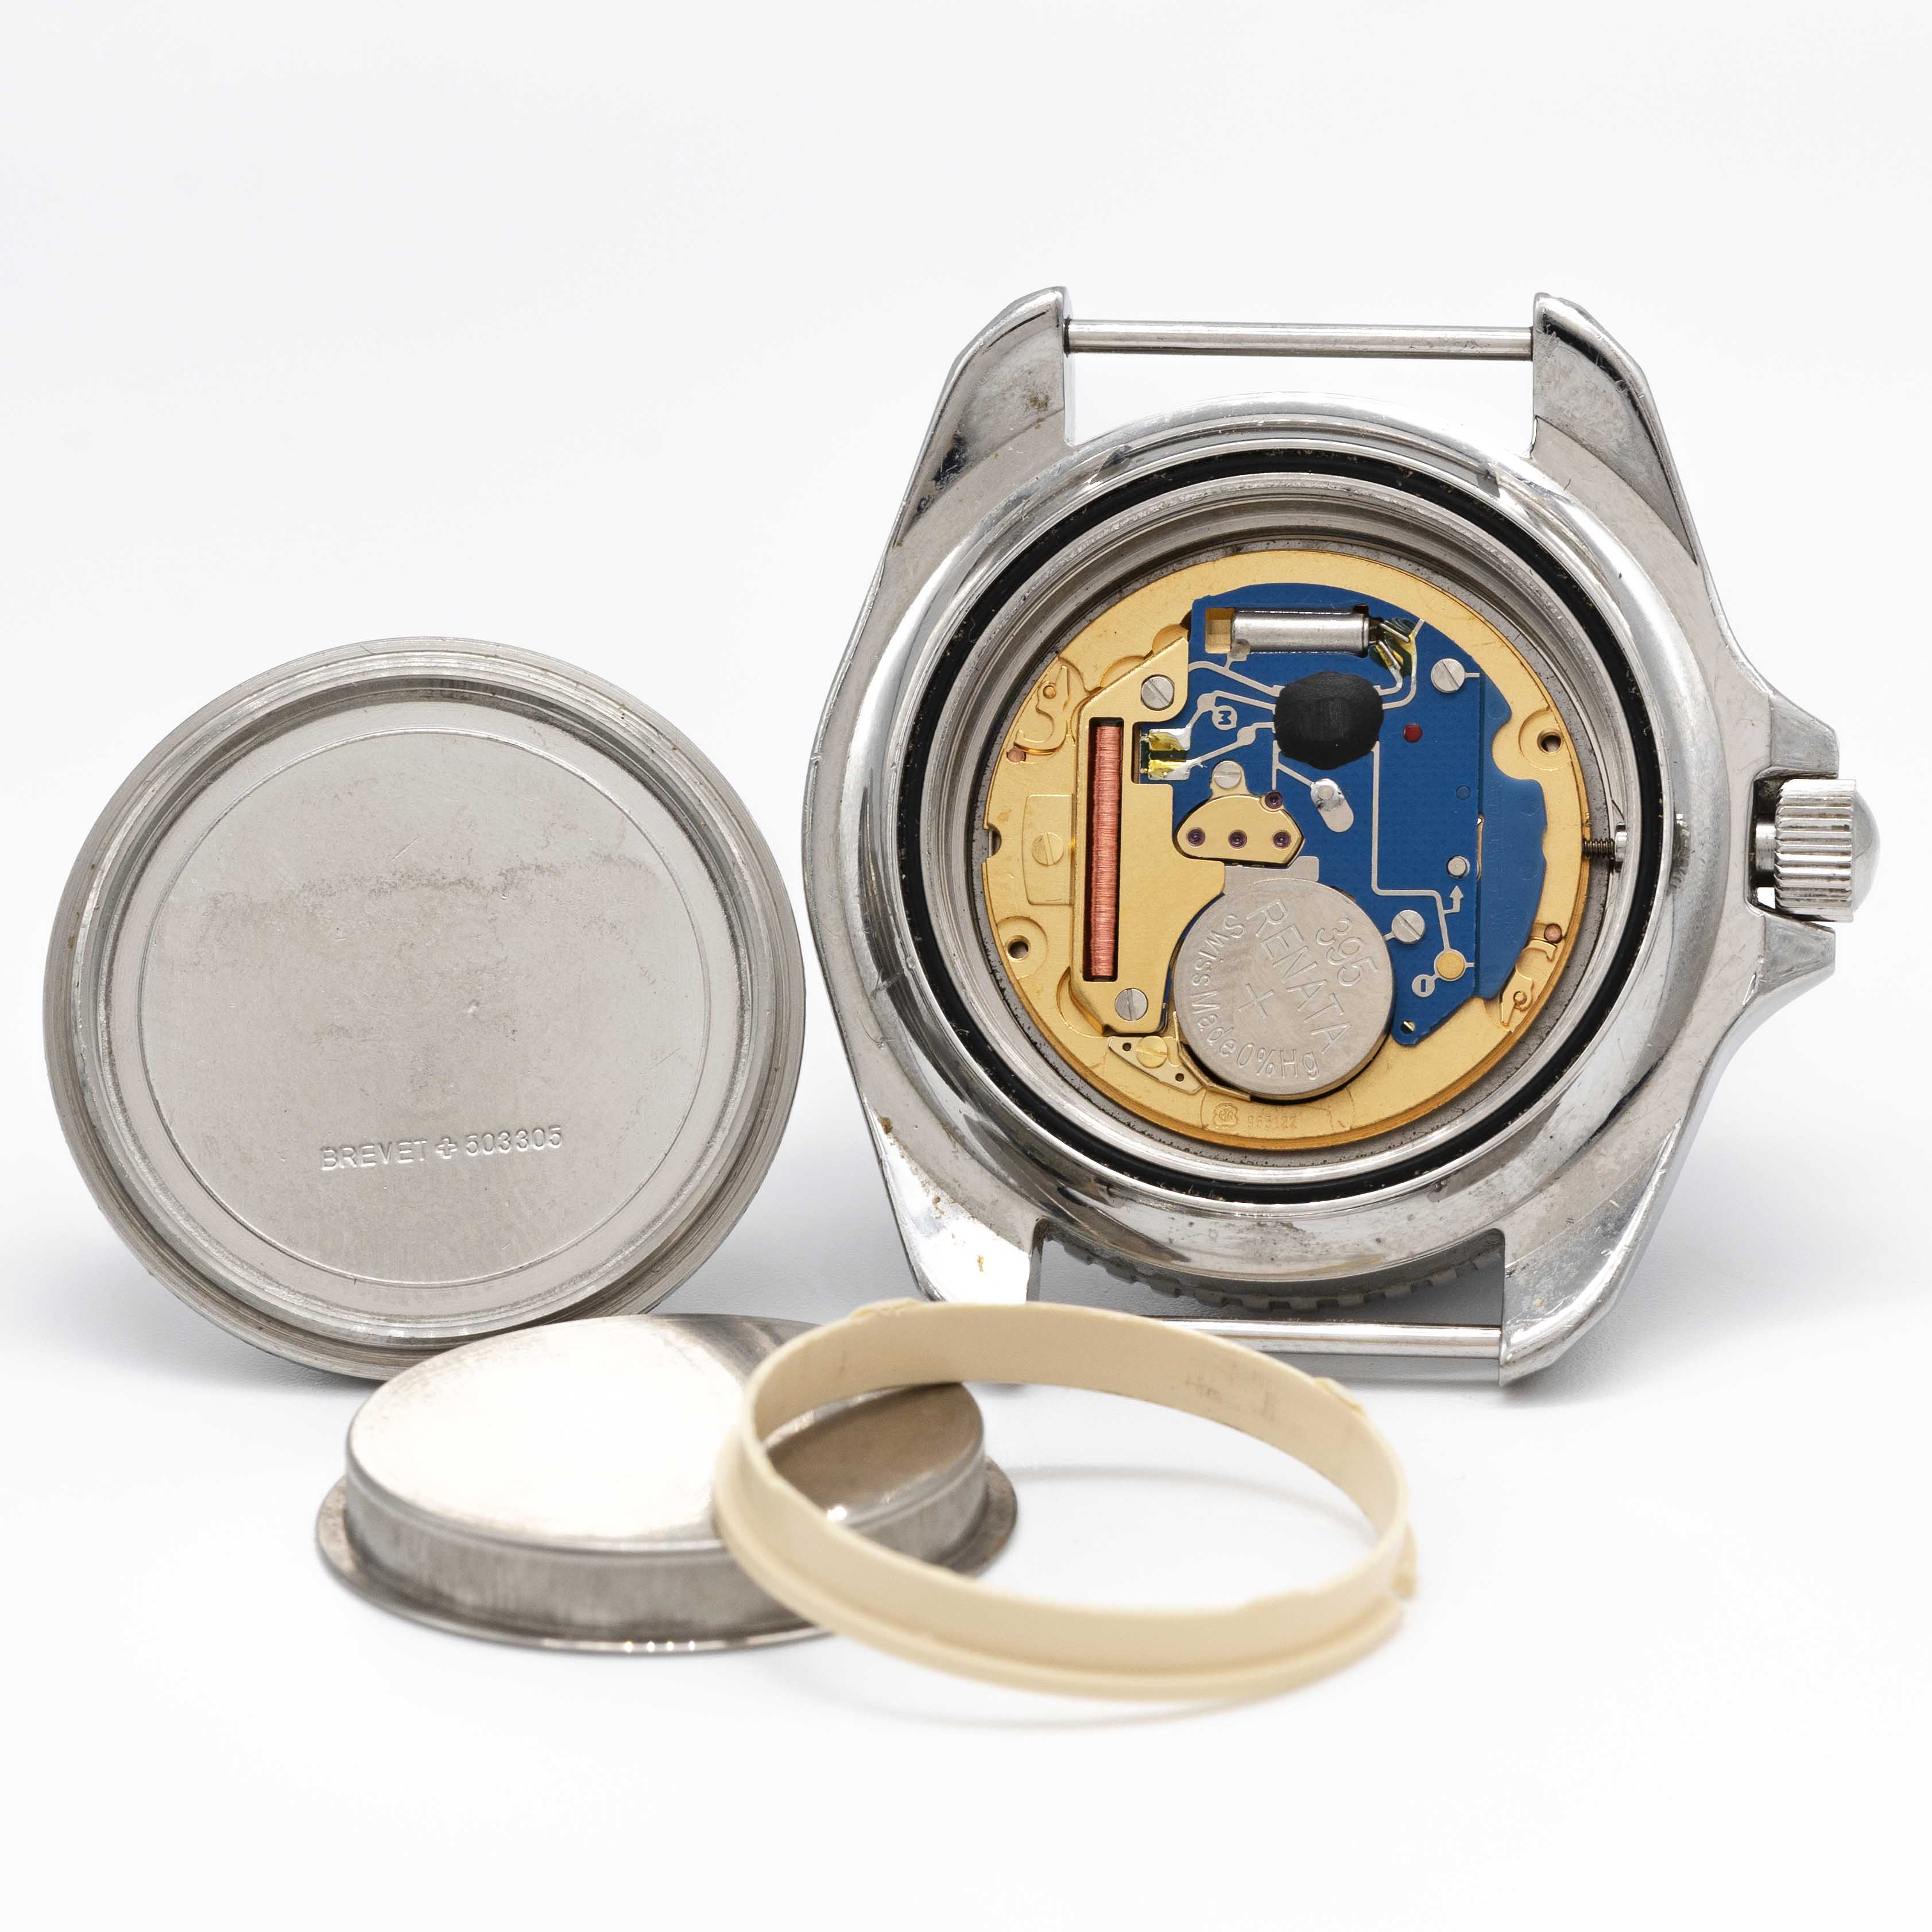 A GENTLEMAN'S STAINLESS STEEL BRITISH MILITARY ISSUED CWC QUARTZ ROYAL NAVY DIVERS WRIST WATCH DATED - Image 6 of 8